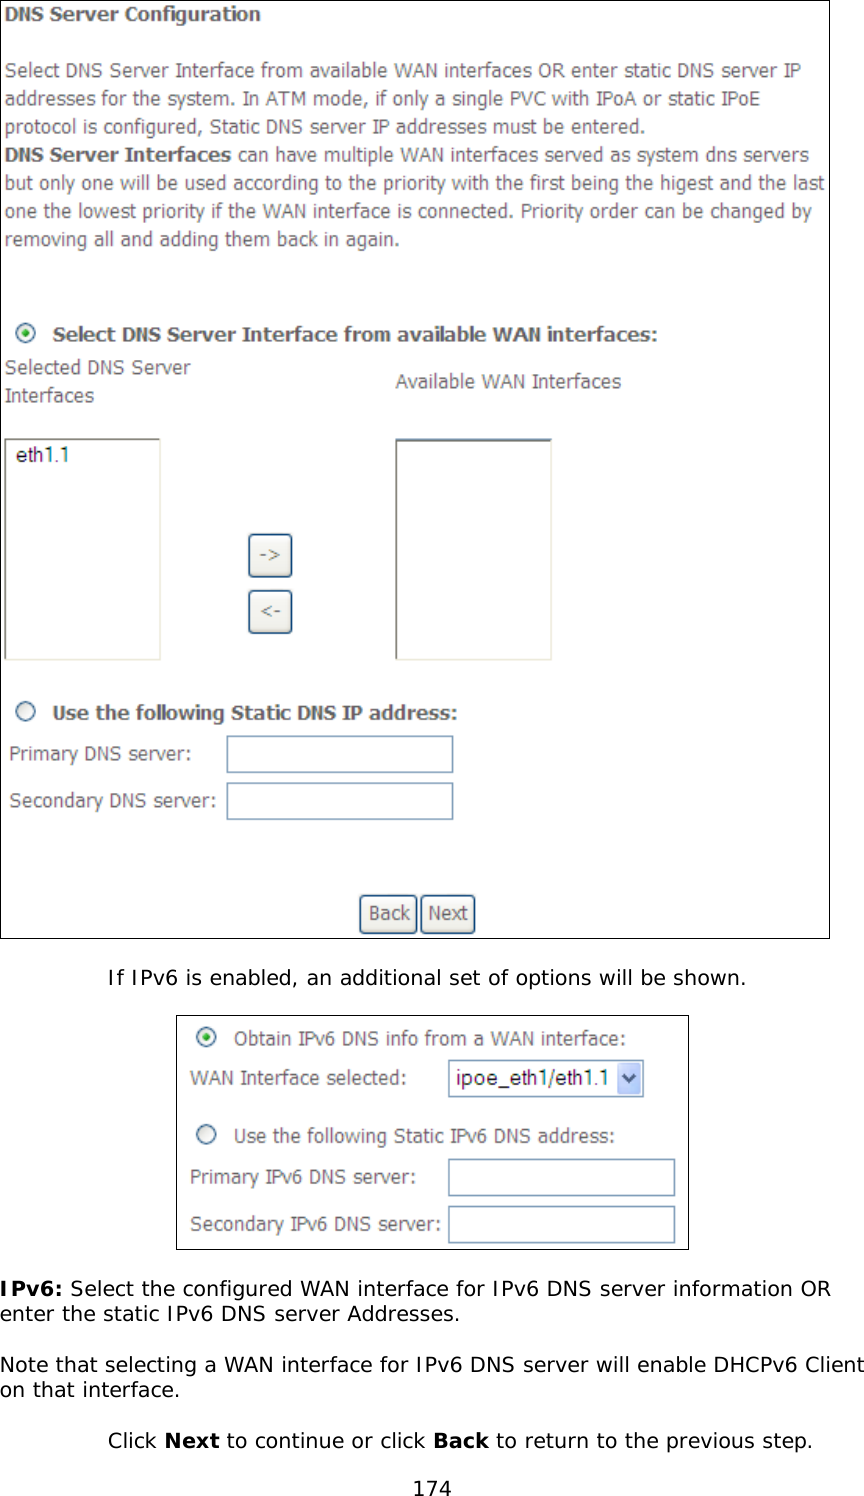  174     If IPv6 is enabled, an additional set of options will be shown.    IPv6: Select the configured WAN interface for IPv6 DNS server information OR enter the static IPv6 DNS server Addresses.  Note that selecting a WAN interface for IPv6 DNS server will enable DHCPv6 Client on that interface.   Click Next to continue or click Back to return to the previous step. 